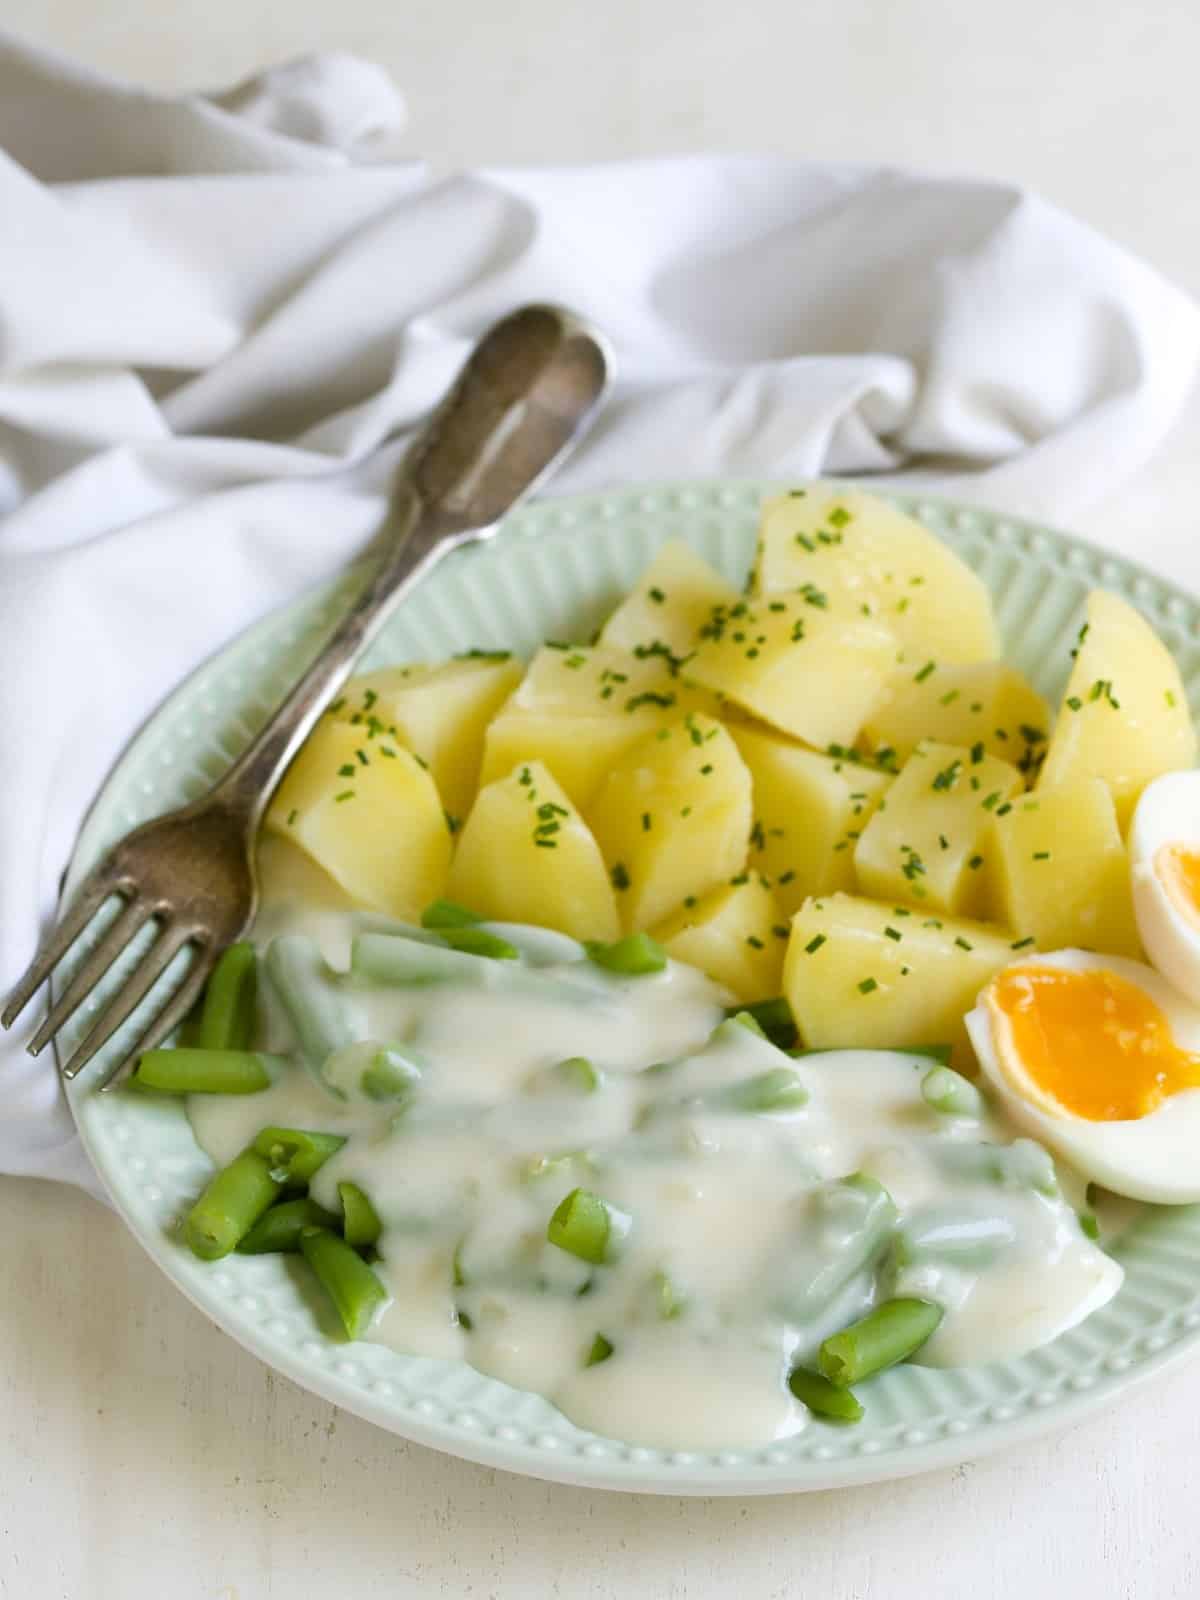 Green beans with white sauce served with boiled potatoes and hard-boiled egg.